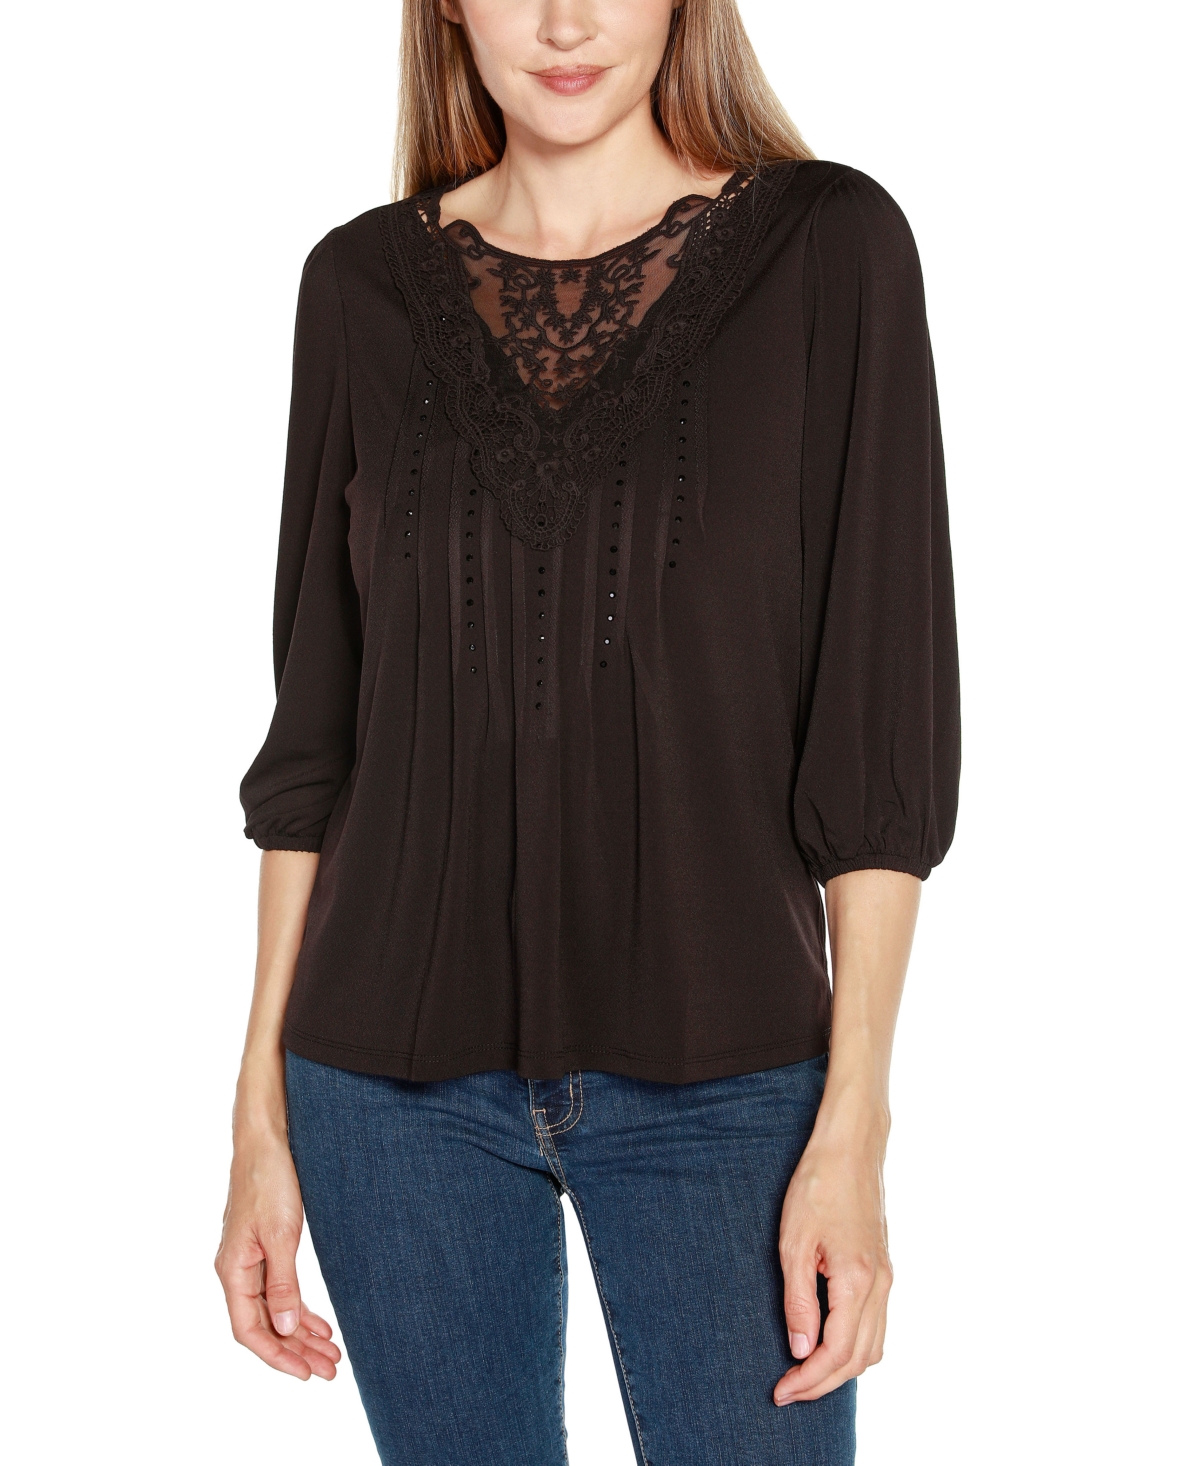 Belldini Black Label Women's Embellished Top With Lace